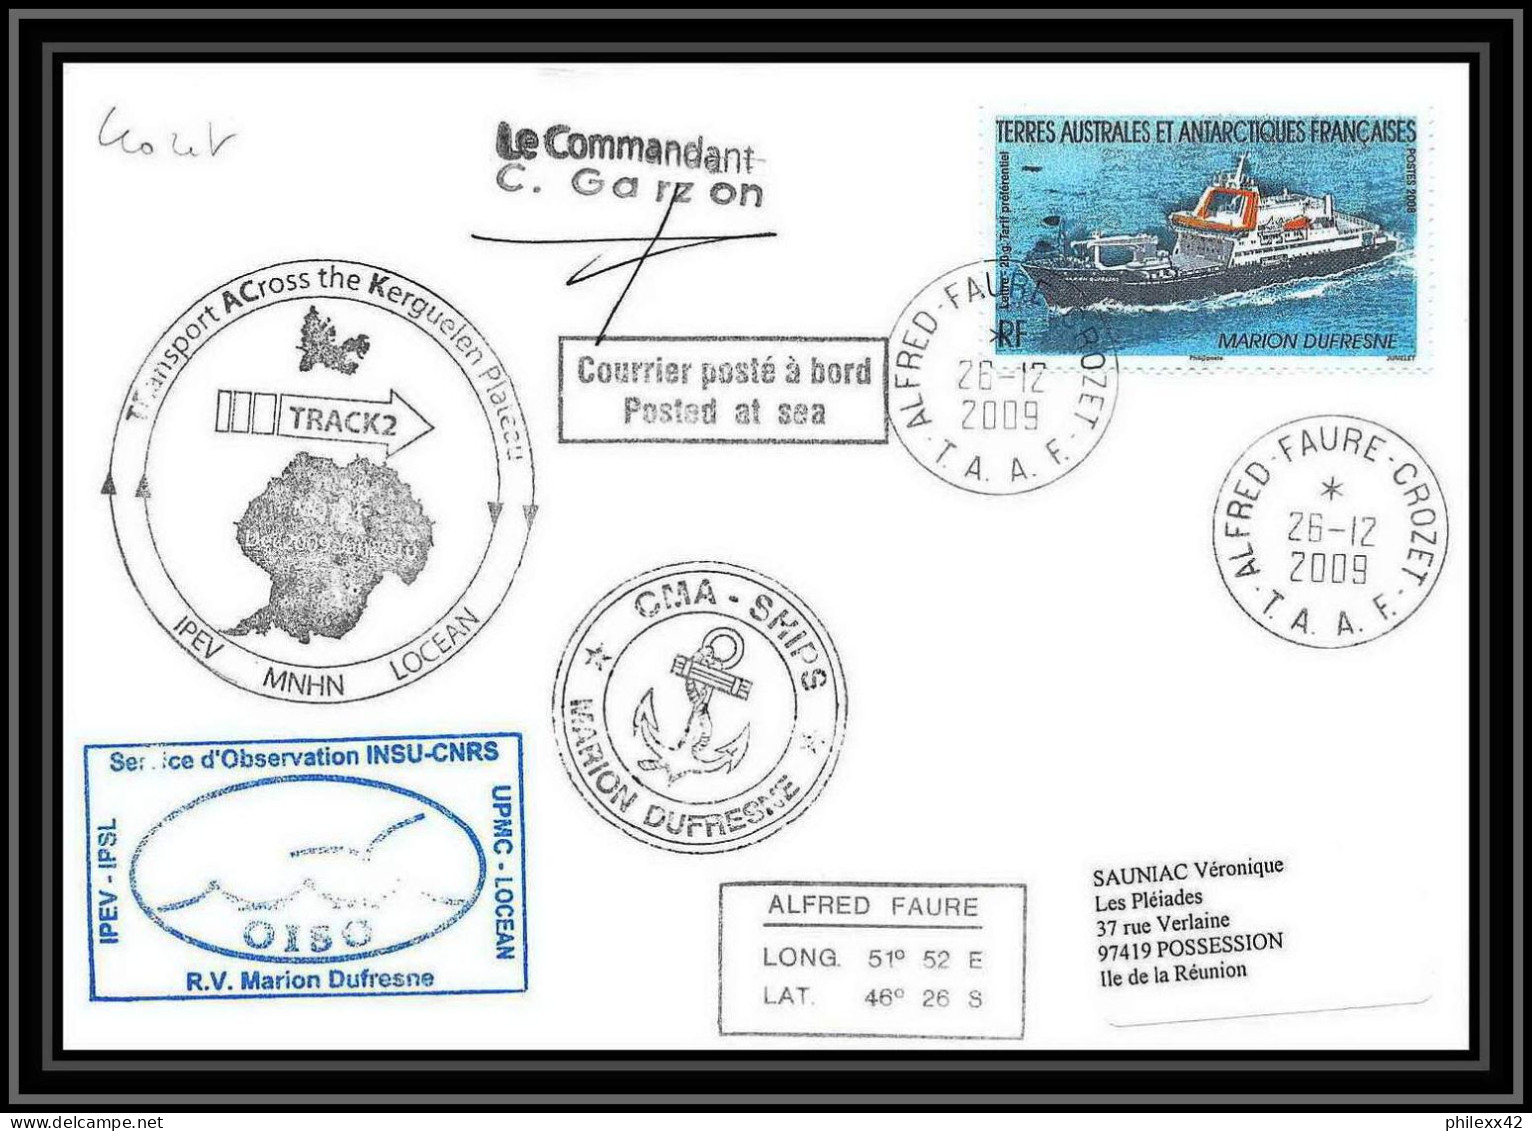 2975 ANTARCTIC terres australes TAAF lettre cover Dufresne 2 Signé signed crozet 26/12/2009 oiso N°520